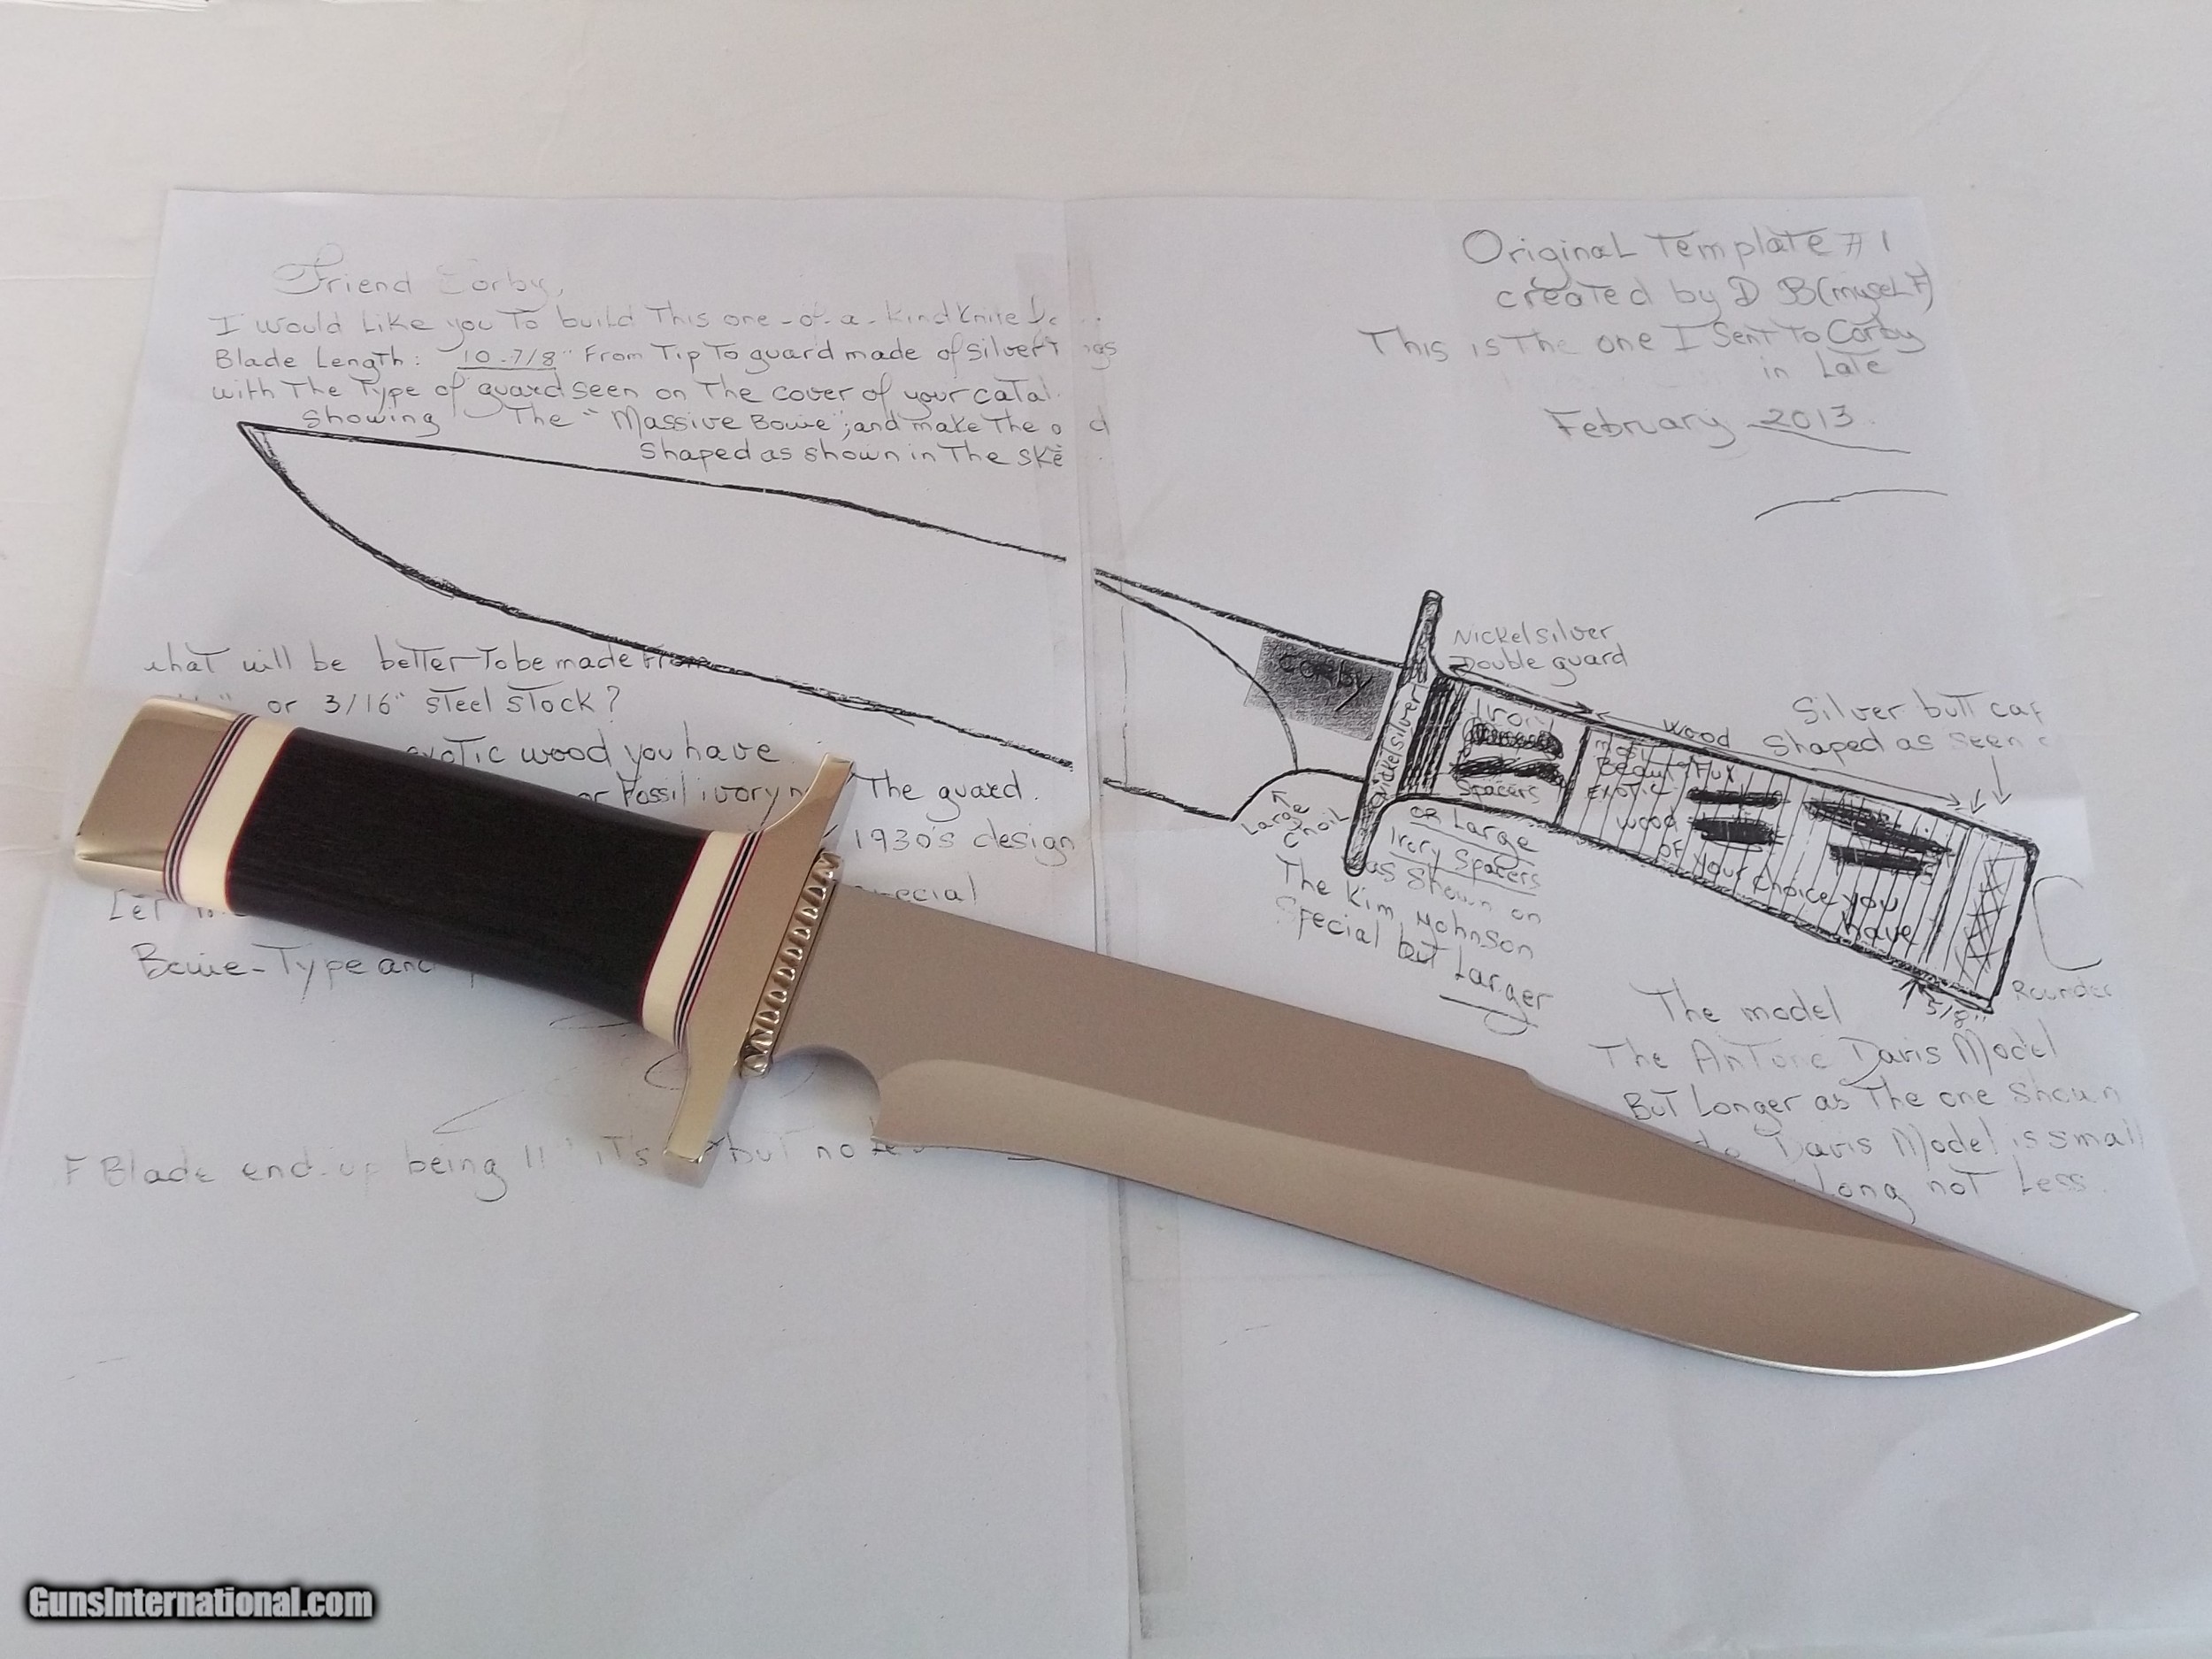 HAROLD CORBY 1 OF A KIND BOWIE FIGHTER CAMP SURVIVAL KNIFE APRIL 2013